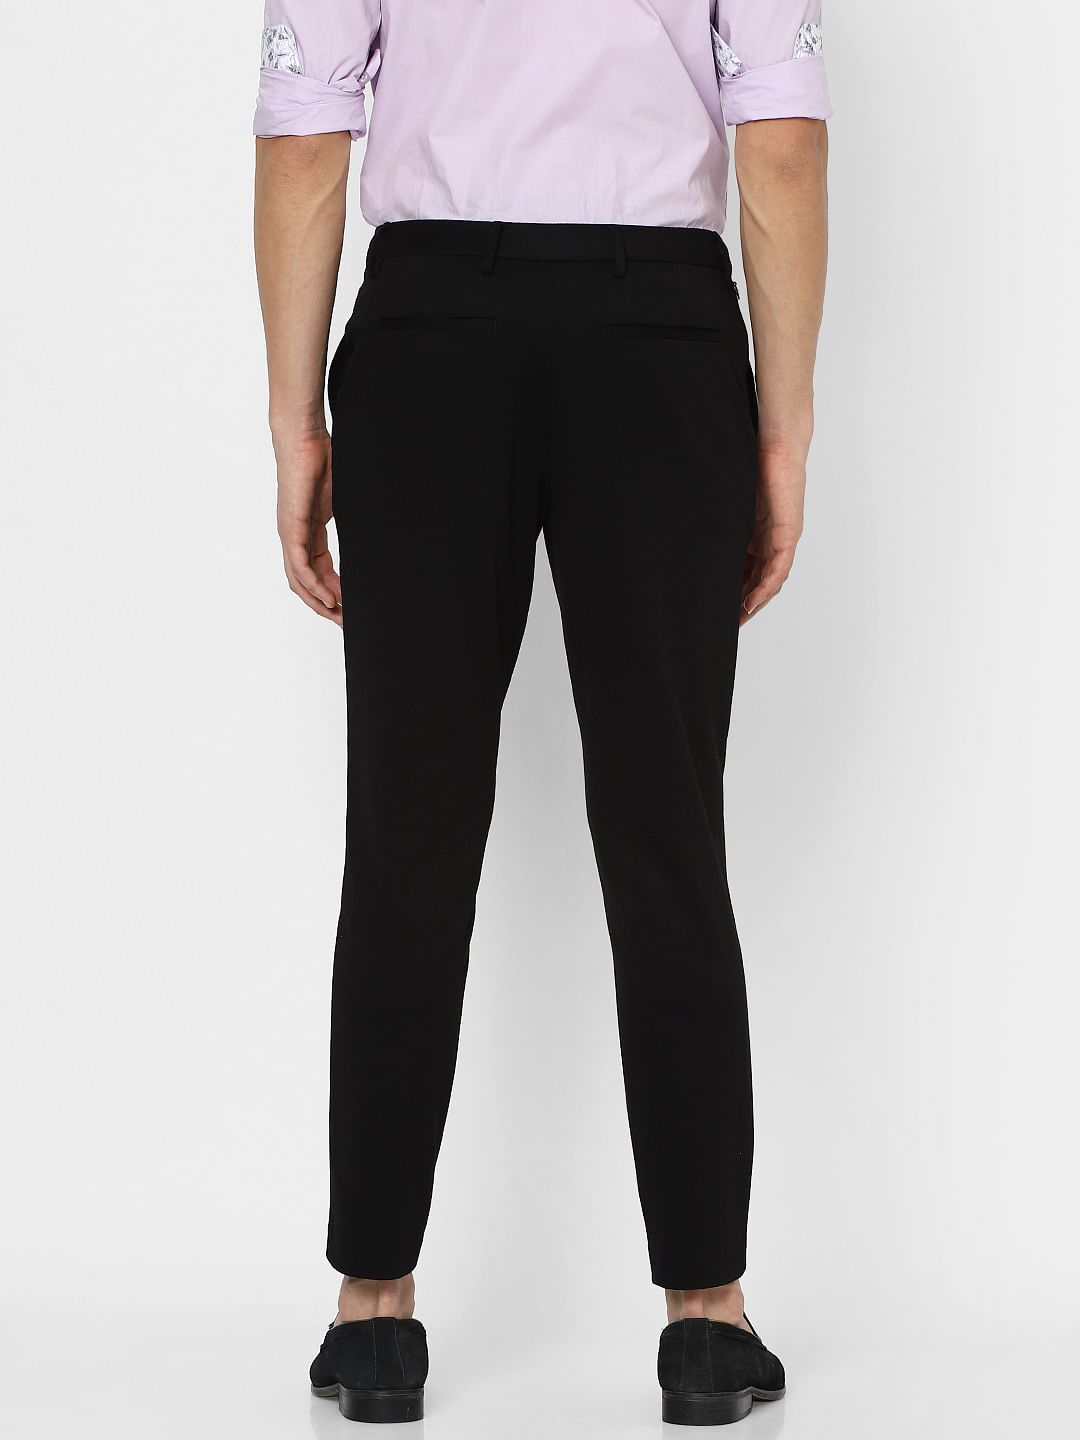 Crepe Womens Stretchy Tapered Fit Salon Trousers Black  SHOP ALL  WORKWEAR from Simon Jersey UK